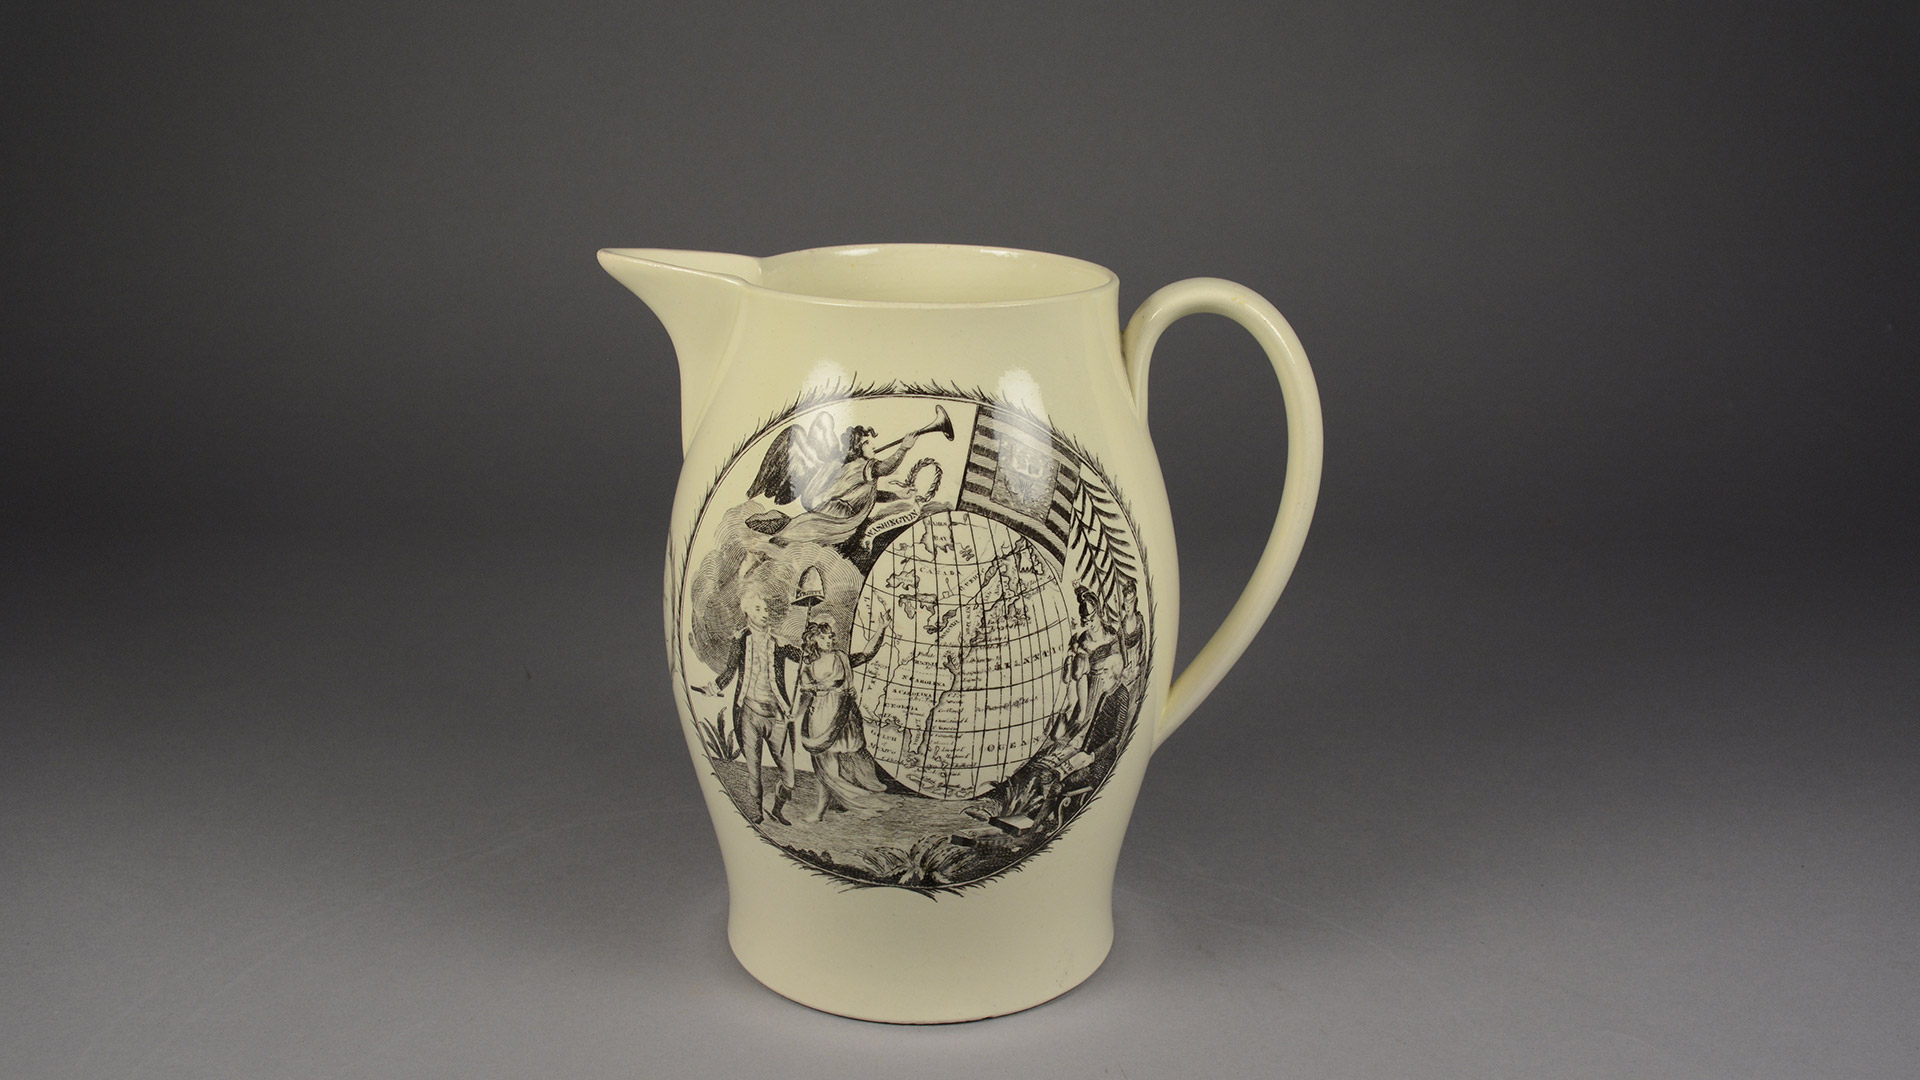 A beige ceramic pitcher with an images of George Washington, Ben Franklin, and figures representing liberty, wisdom, and justice